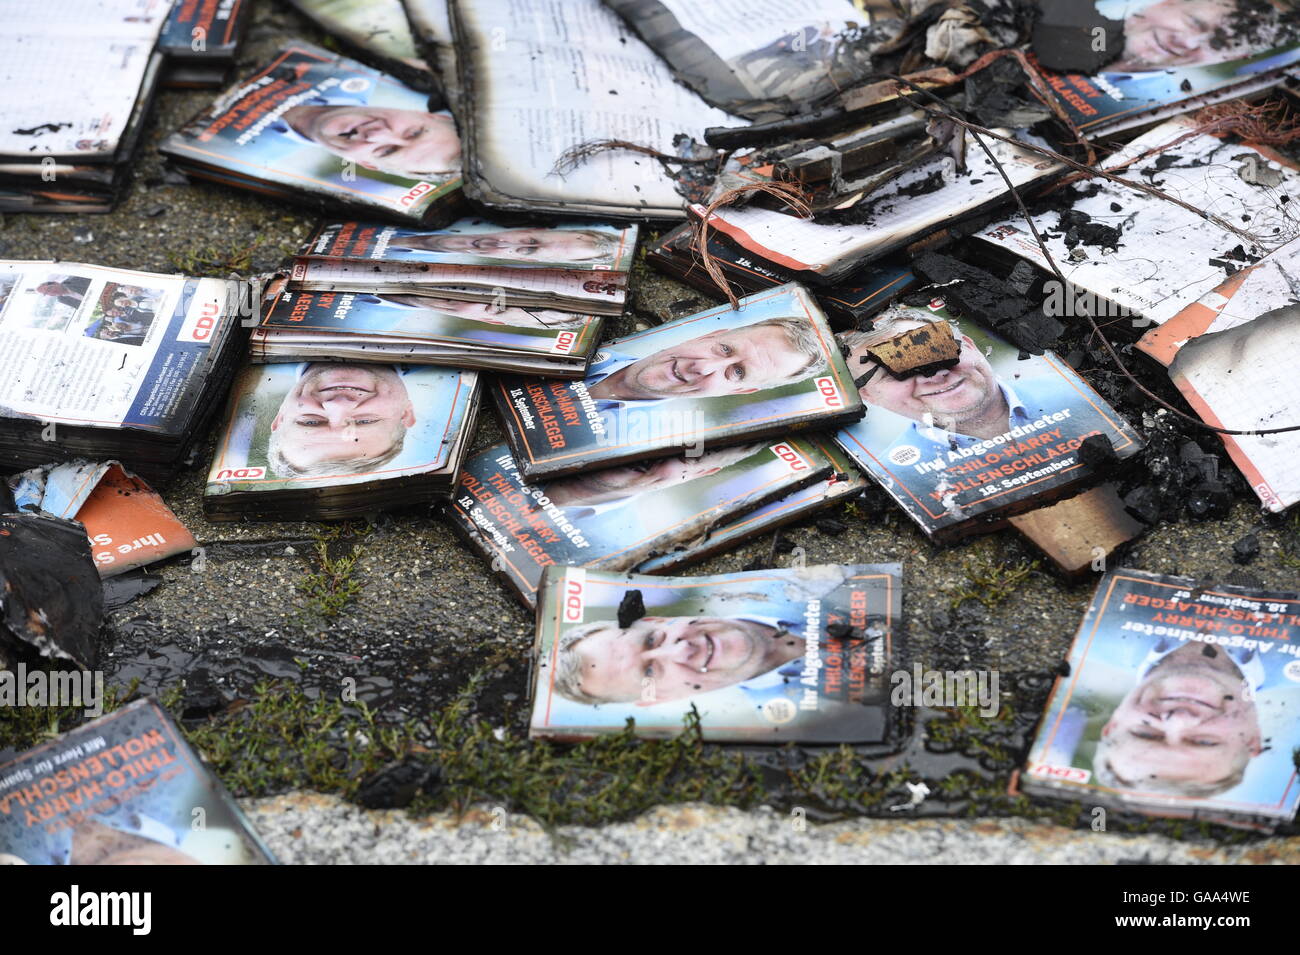 Berlin, Germany. 5th Aug, 2016. Leaflets of CDU politician Thilo-Harry Wollenschlaeger lying next to a burned-out election campaign bus in Berlin, Germany, 5 August 2016. The campaign bus was completely gutted by fire in Berlin-Staaken. The polizeilicher Staatsschutz (lit. police state security) is investigating. PHOTO: RAINER JENSEN/DPA/Alamy Live News Stock Photo